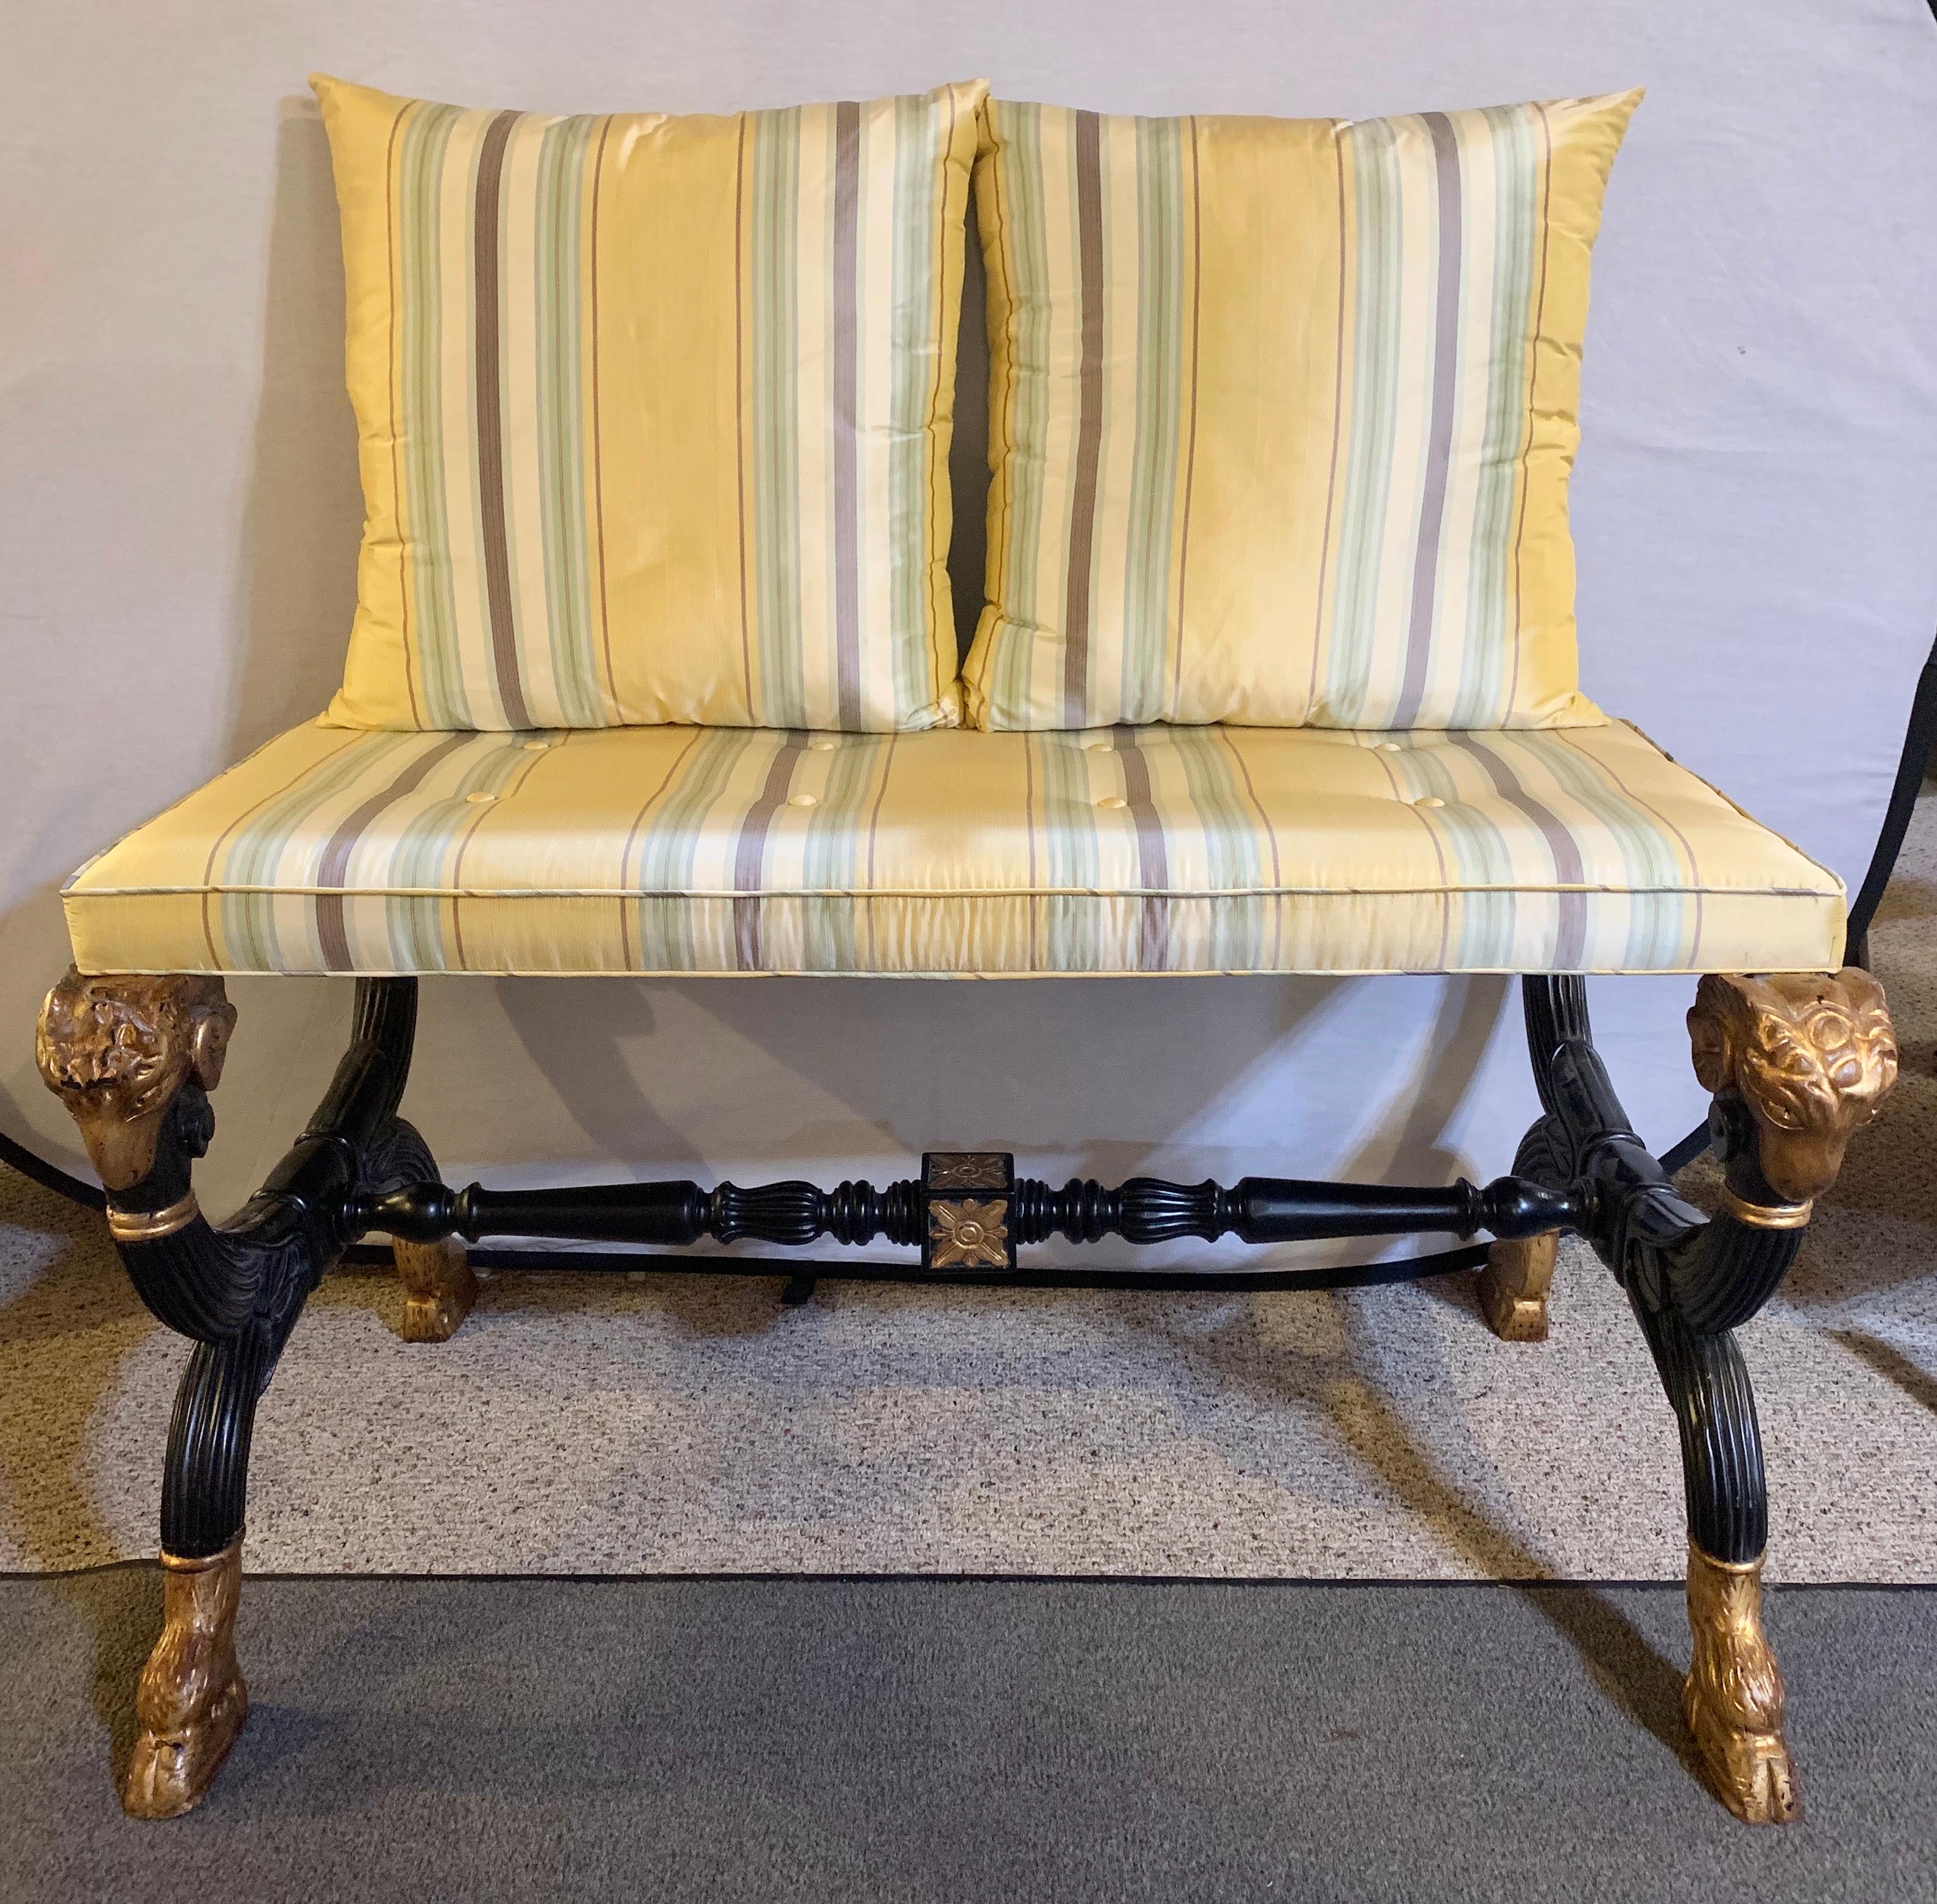 Ebonized & gilt benches or settes having mantra silk scalamandre upholstery. A fine pair each with a gilt rams head hand-rest. The pair of Hollywood Regency benches are simply stunning in their ebony finish with gilt carved hoof feet and rams heads